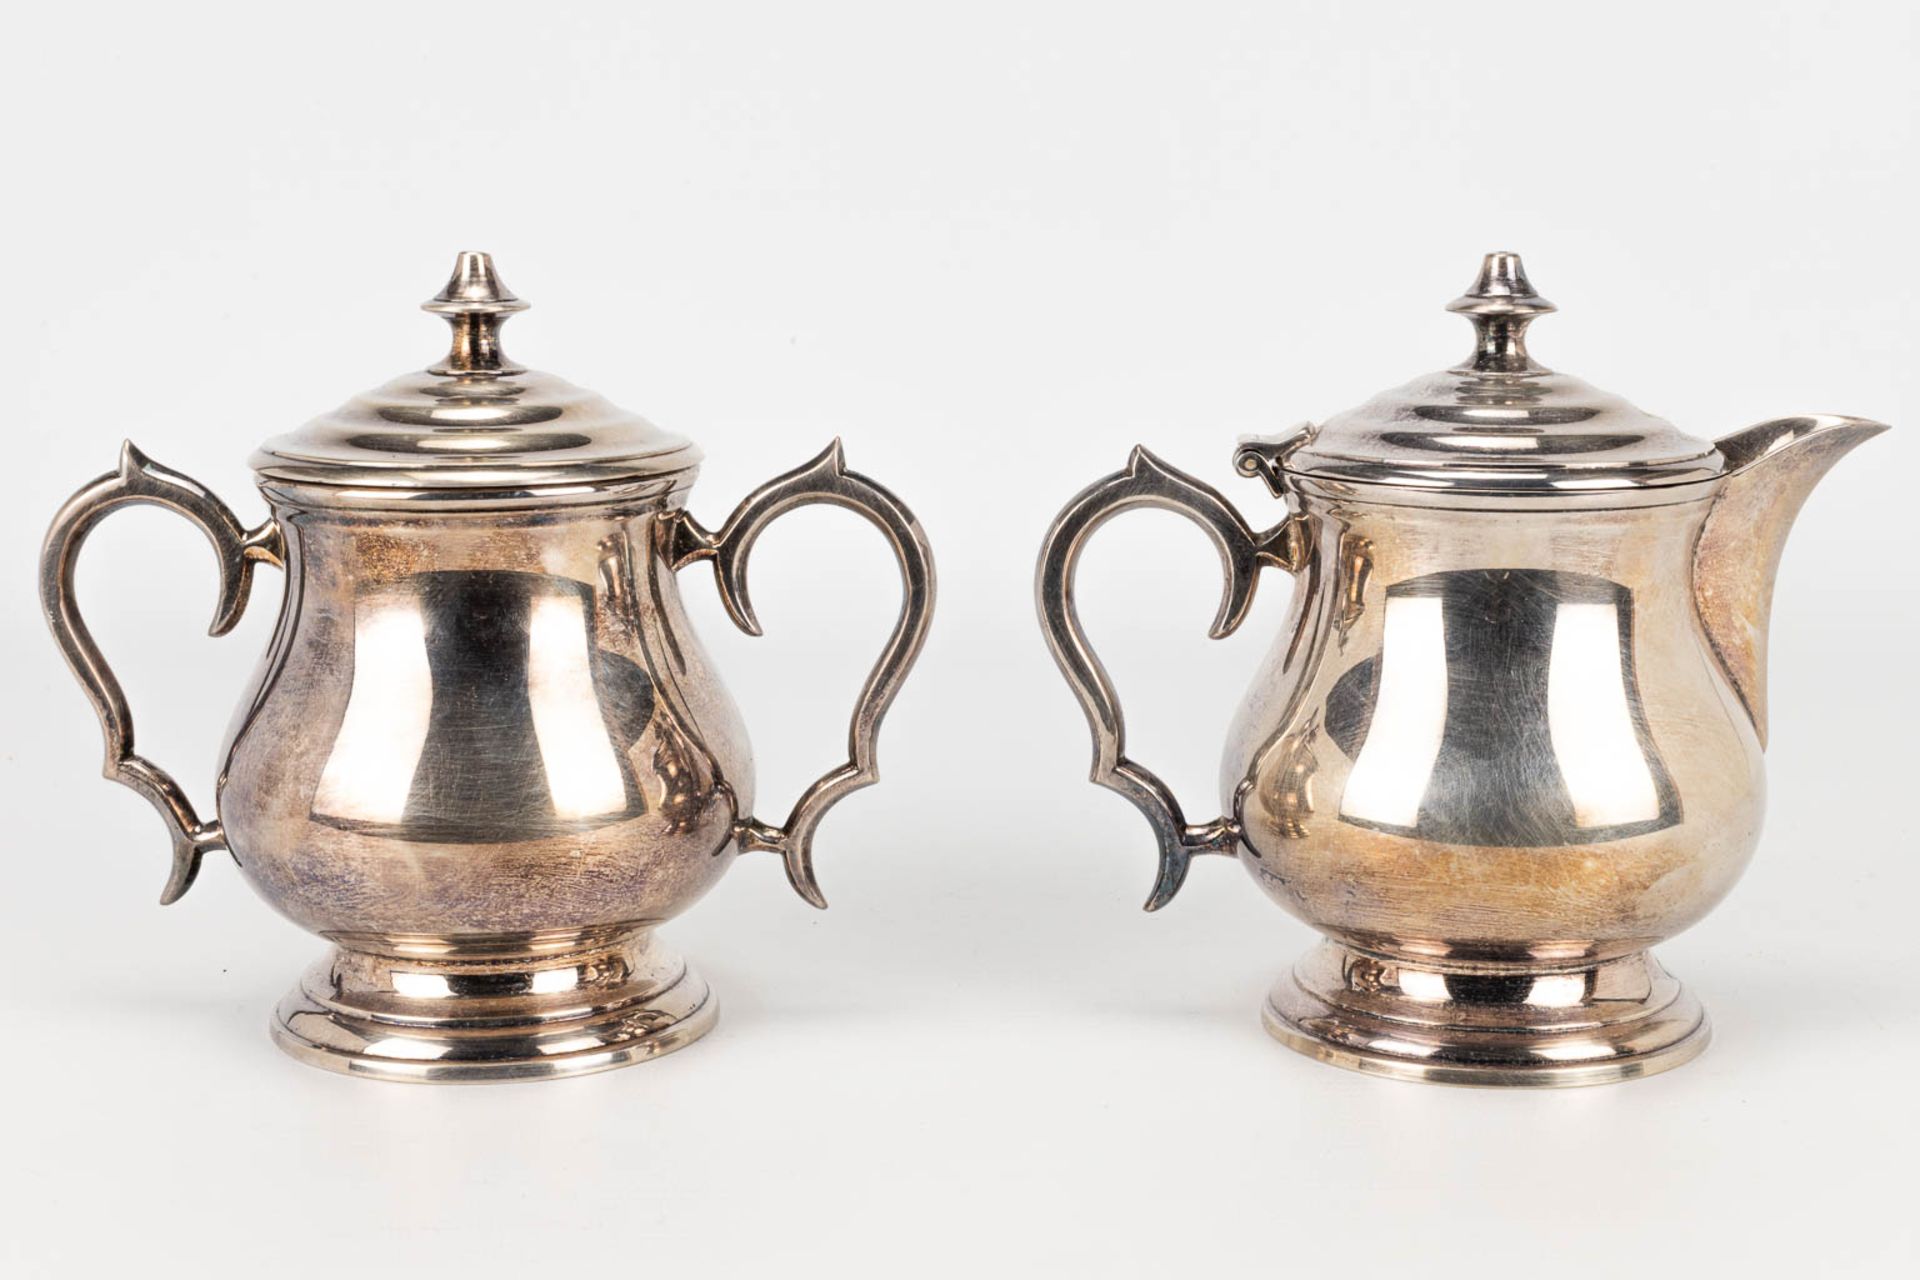 A coffee and tea service made of silver-plated metal. - Image 10 of 15